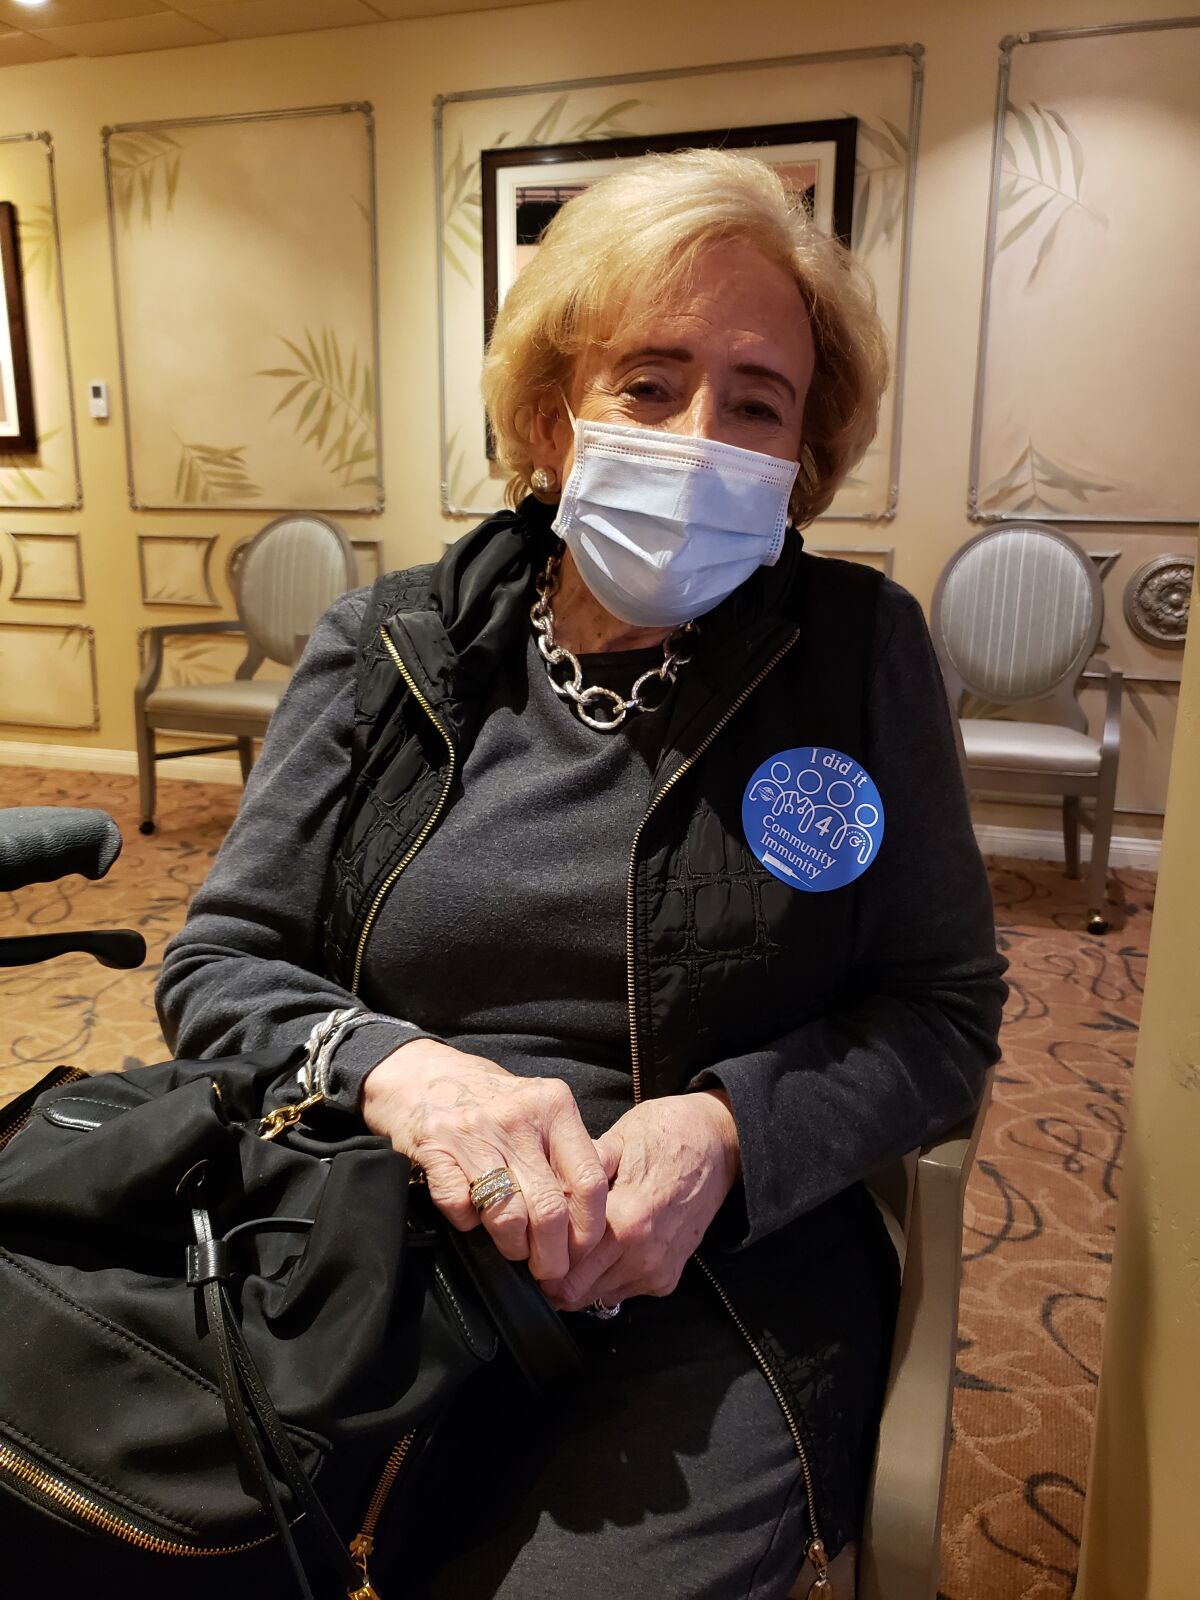 Chateau La Jolla resident Judy Chamberlain sports a sticker after getting her COVID-19 vaccination.